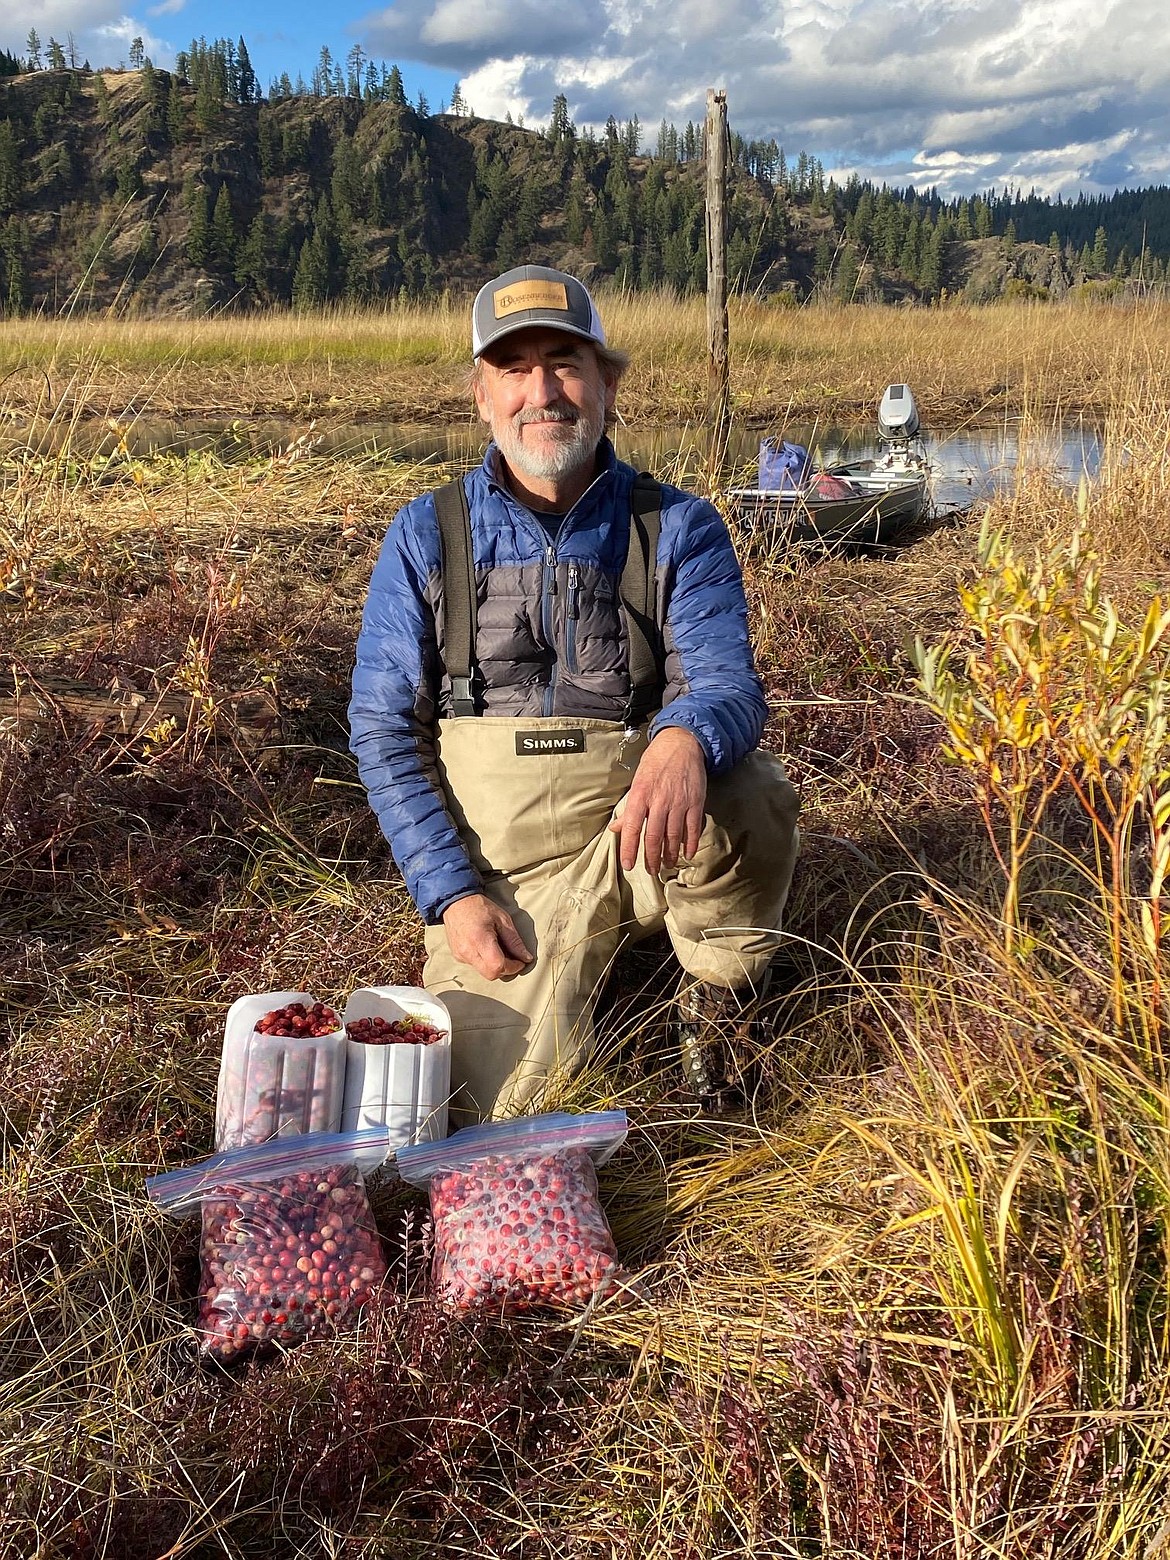 "Every year about three weeks before Thanksgiving we harvest wild North Idaho cranberries for the holidays."